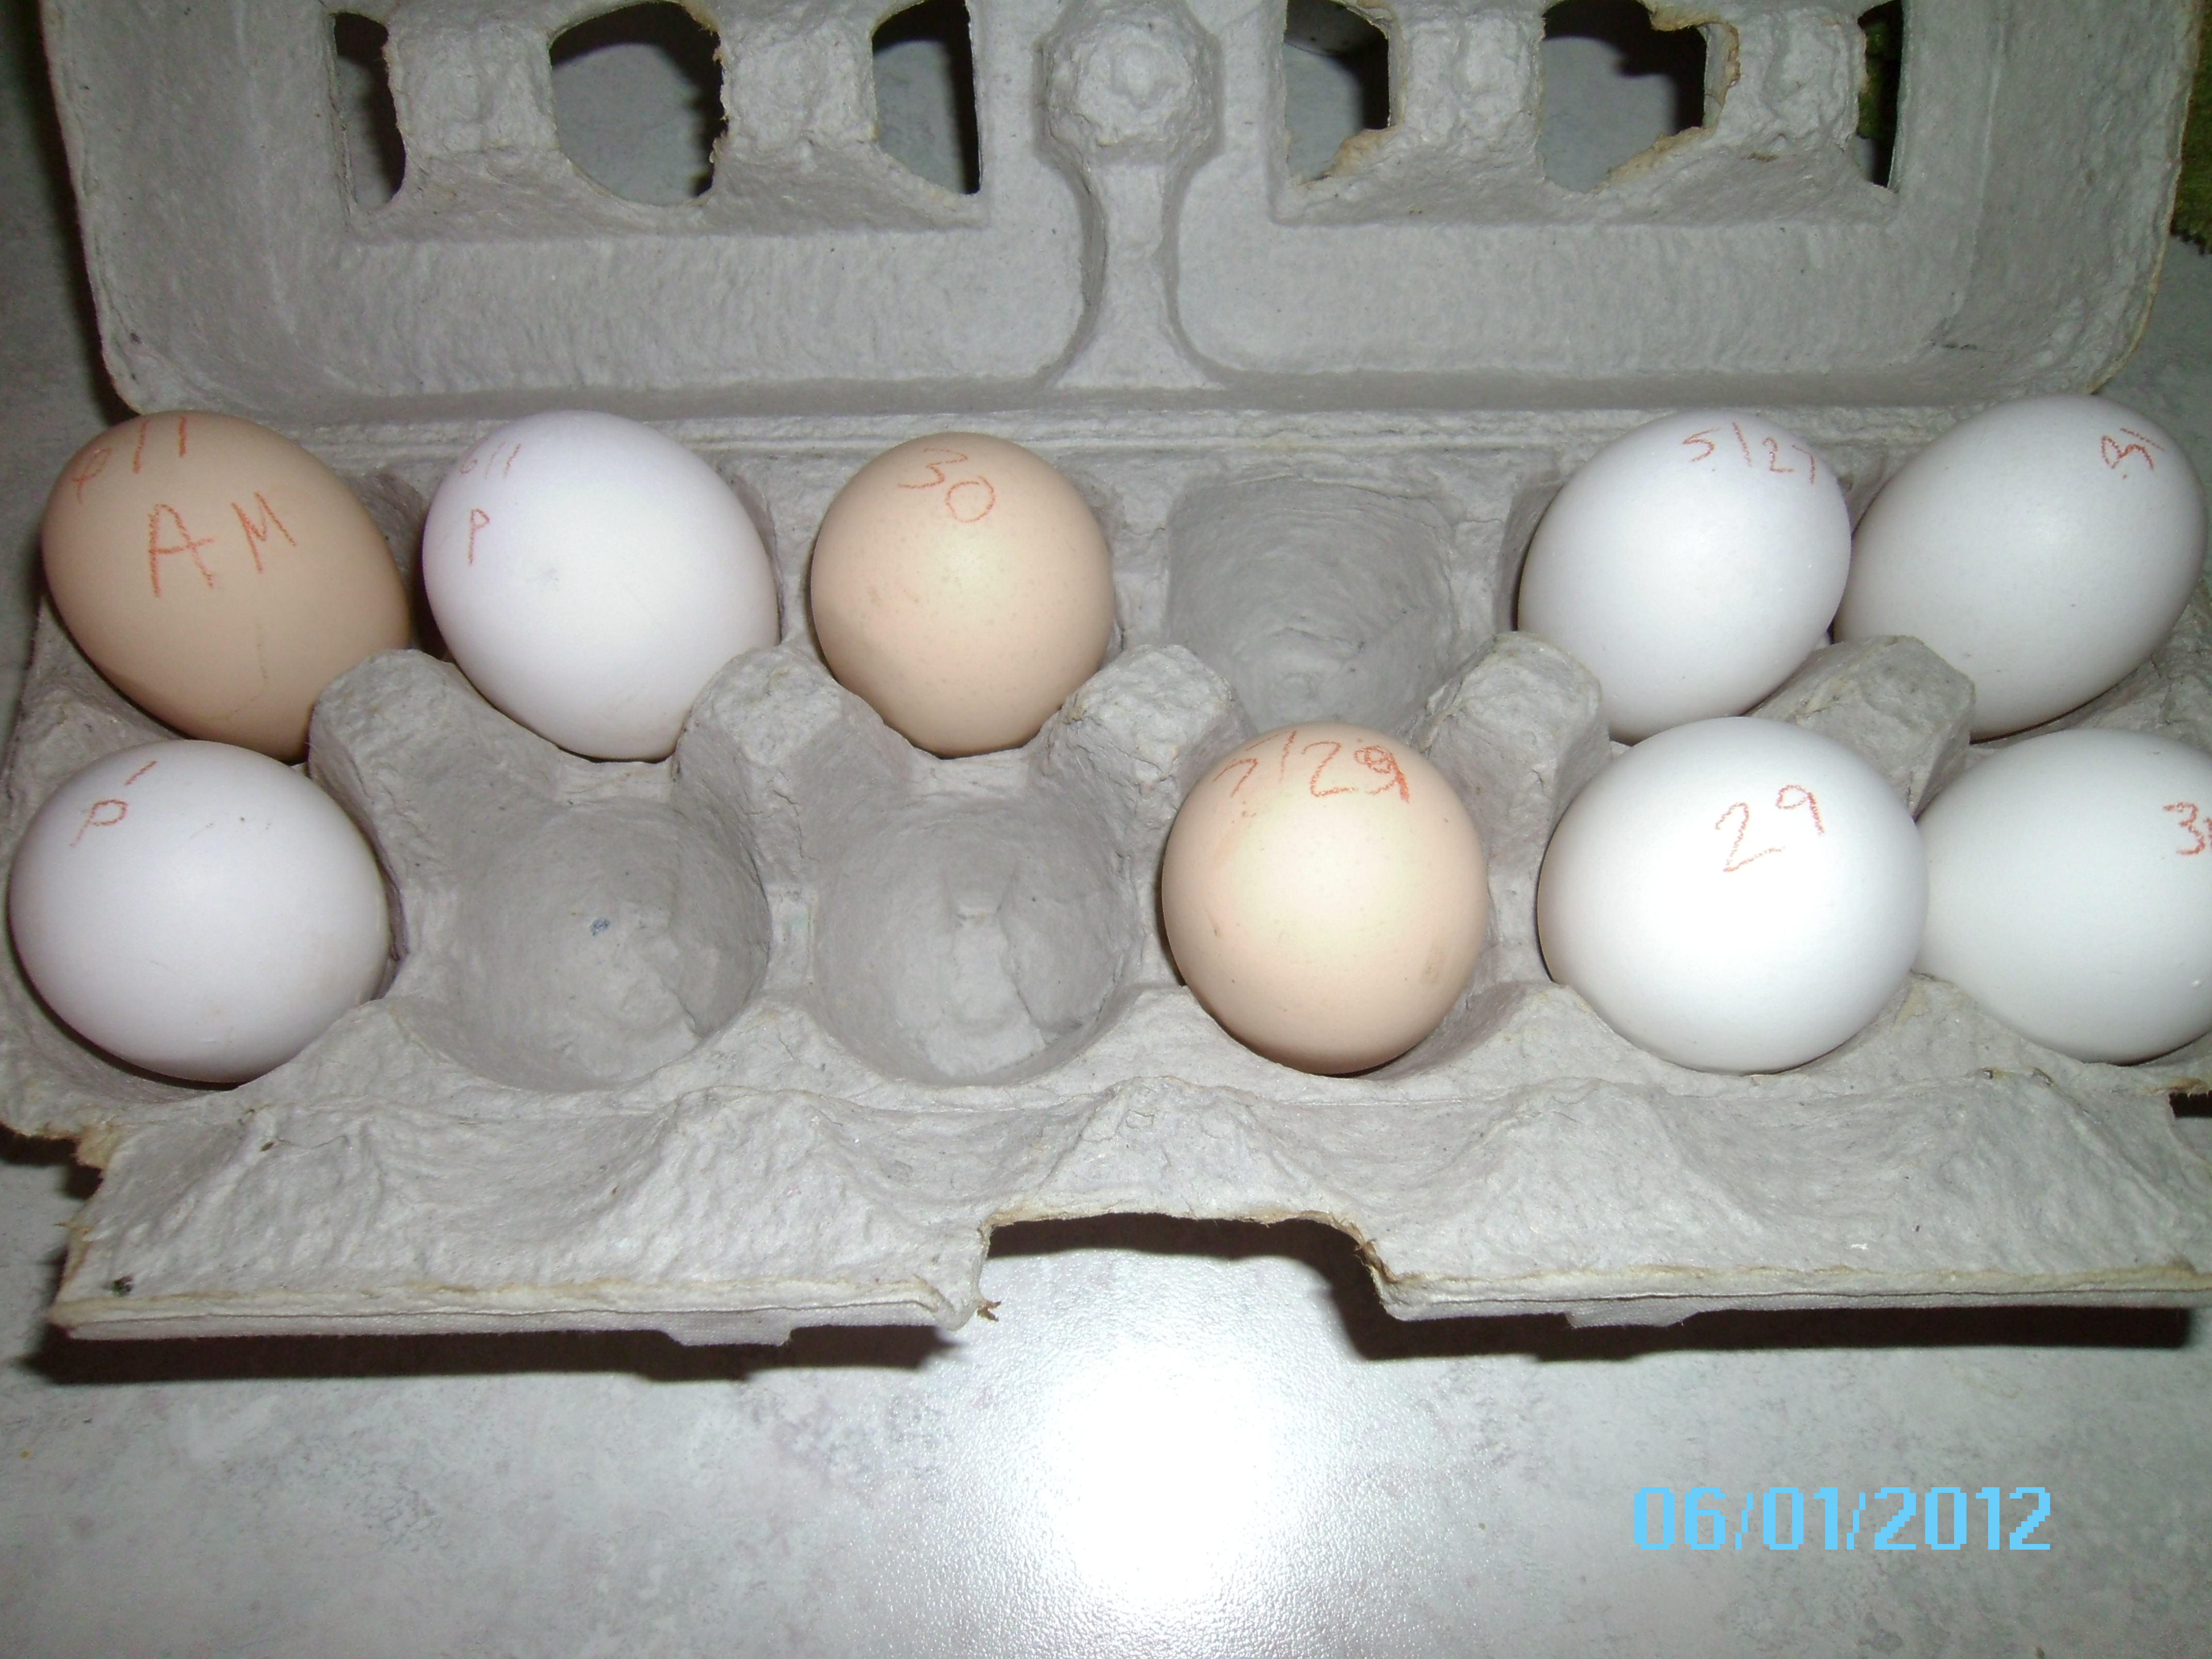 Eggs, all 3 girls are laying now, actually got a full dozen this week,  oddly enough though one Leghorn lays a small white egg while the other Leghorn lays a large white egg.  Maybe this is normal.